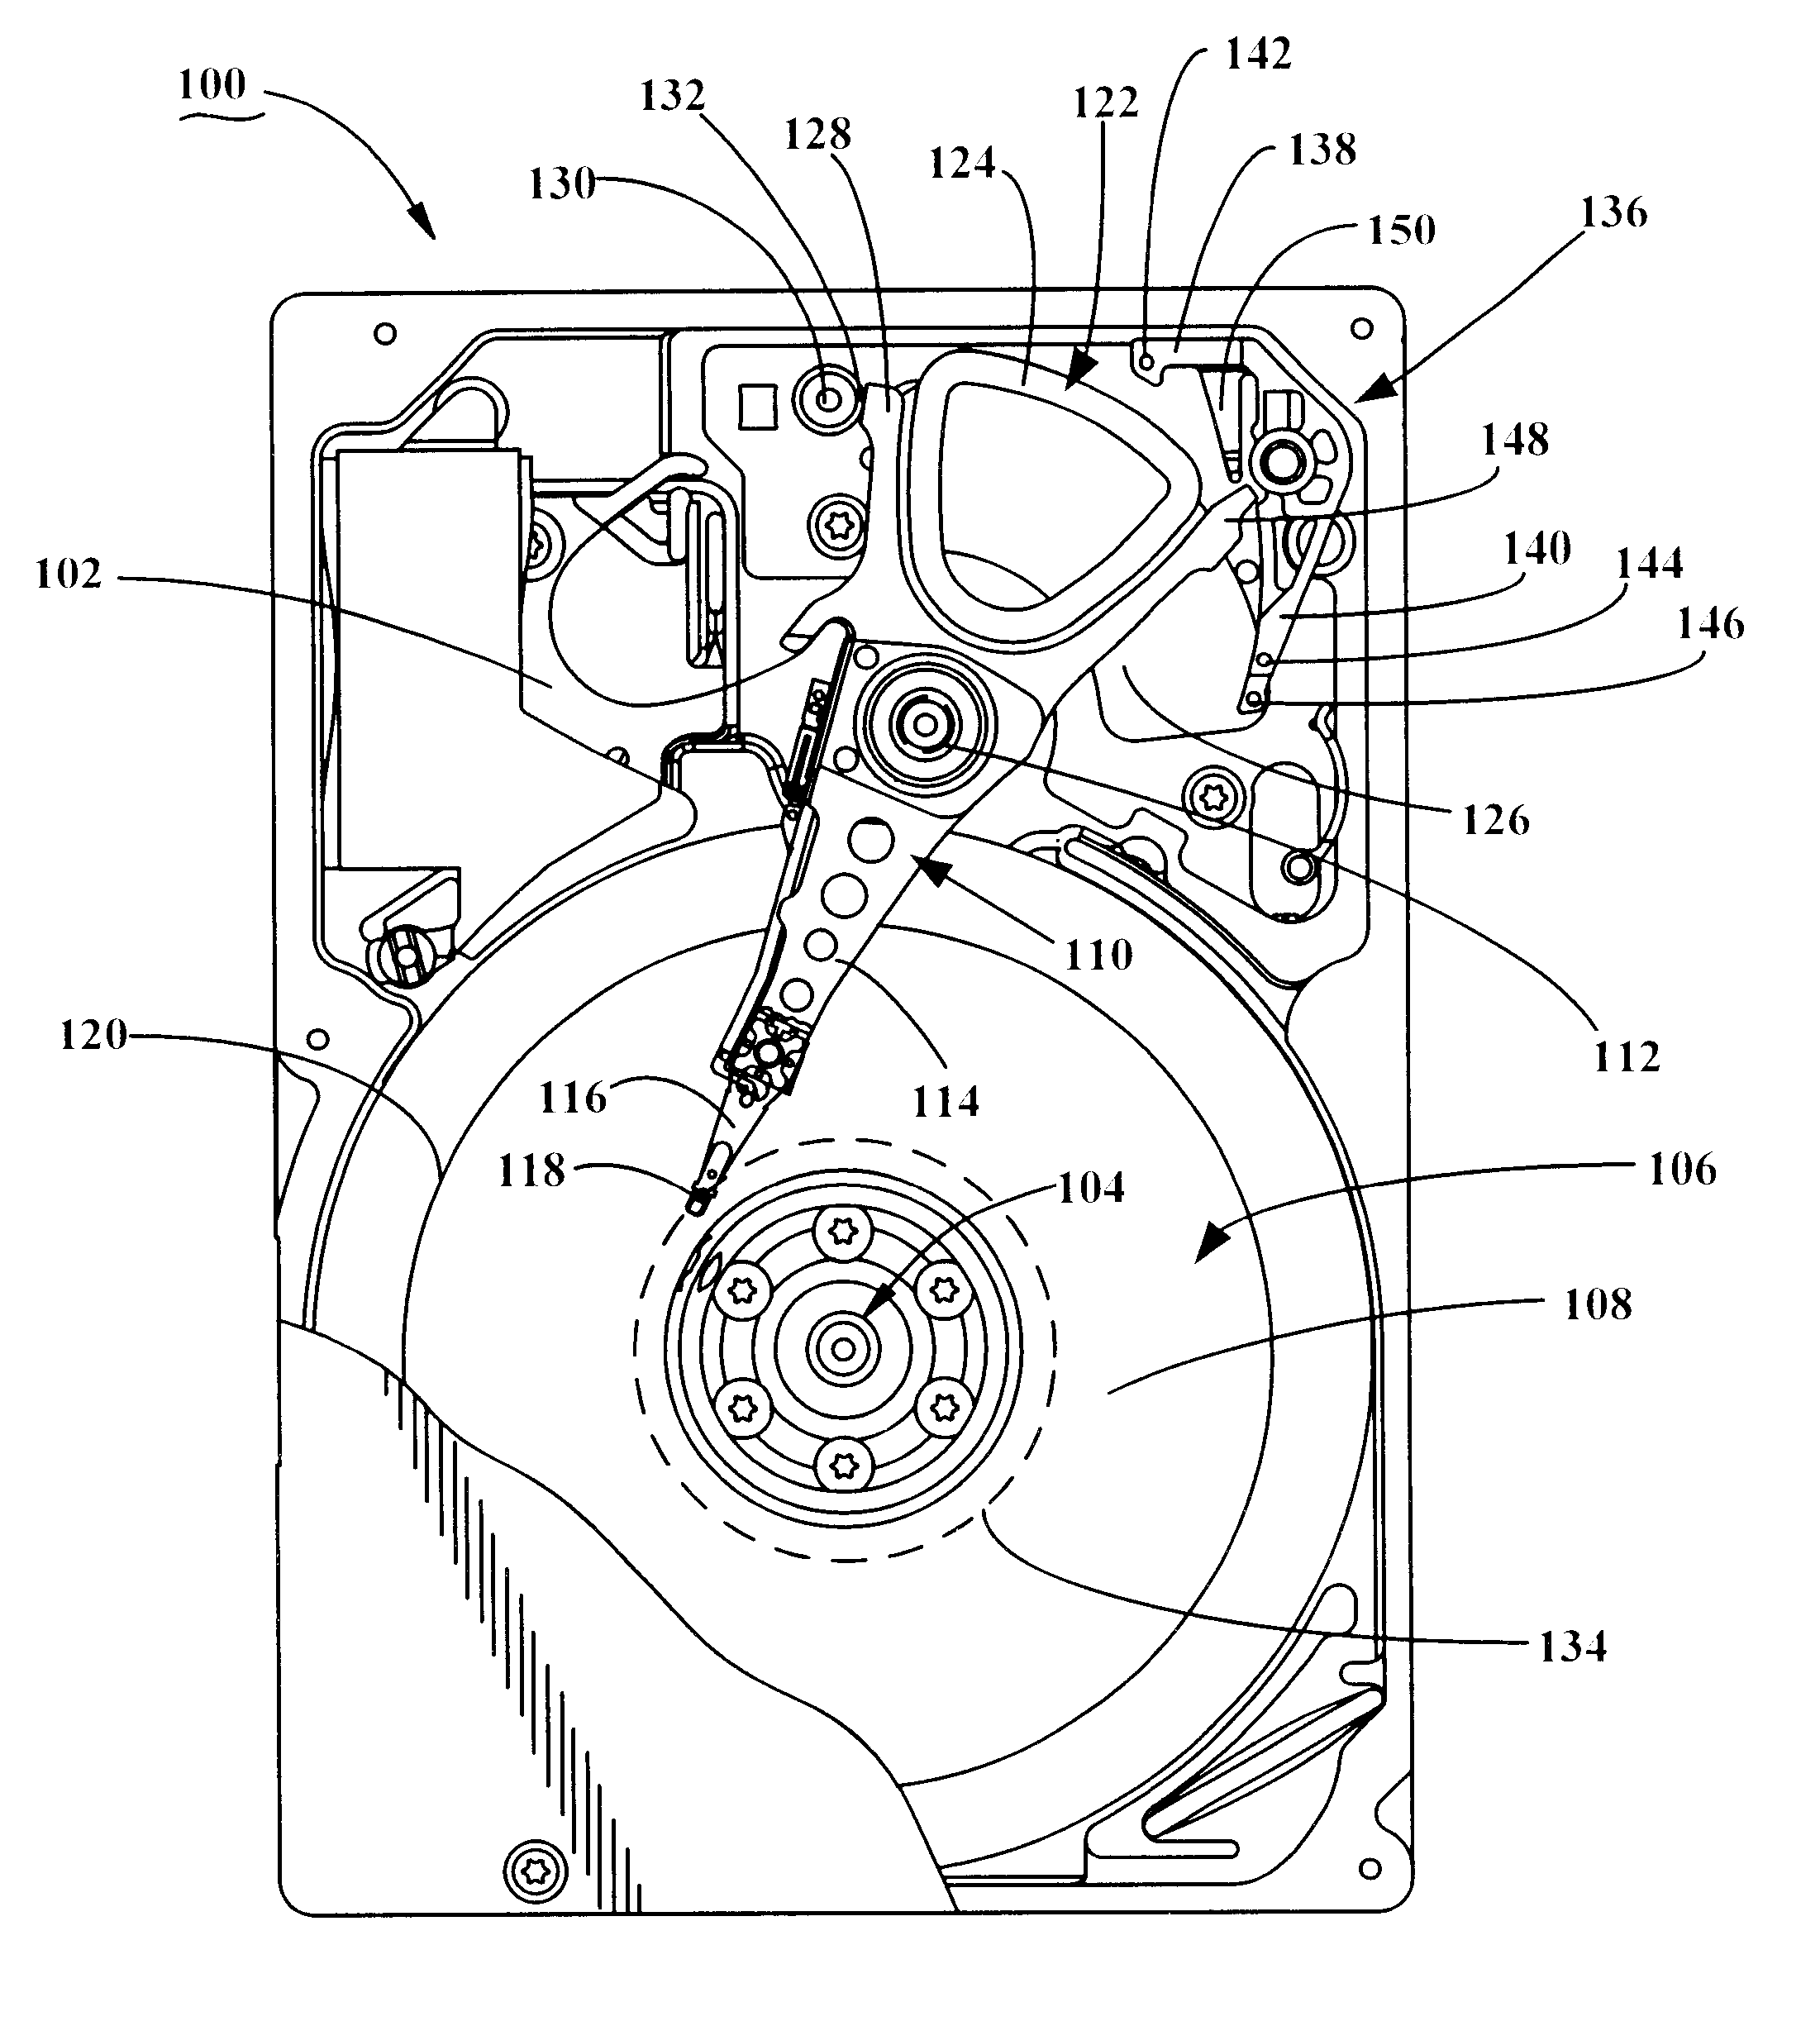 Wear reduction of a disc surface using an adaptive dither process